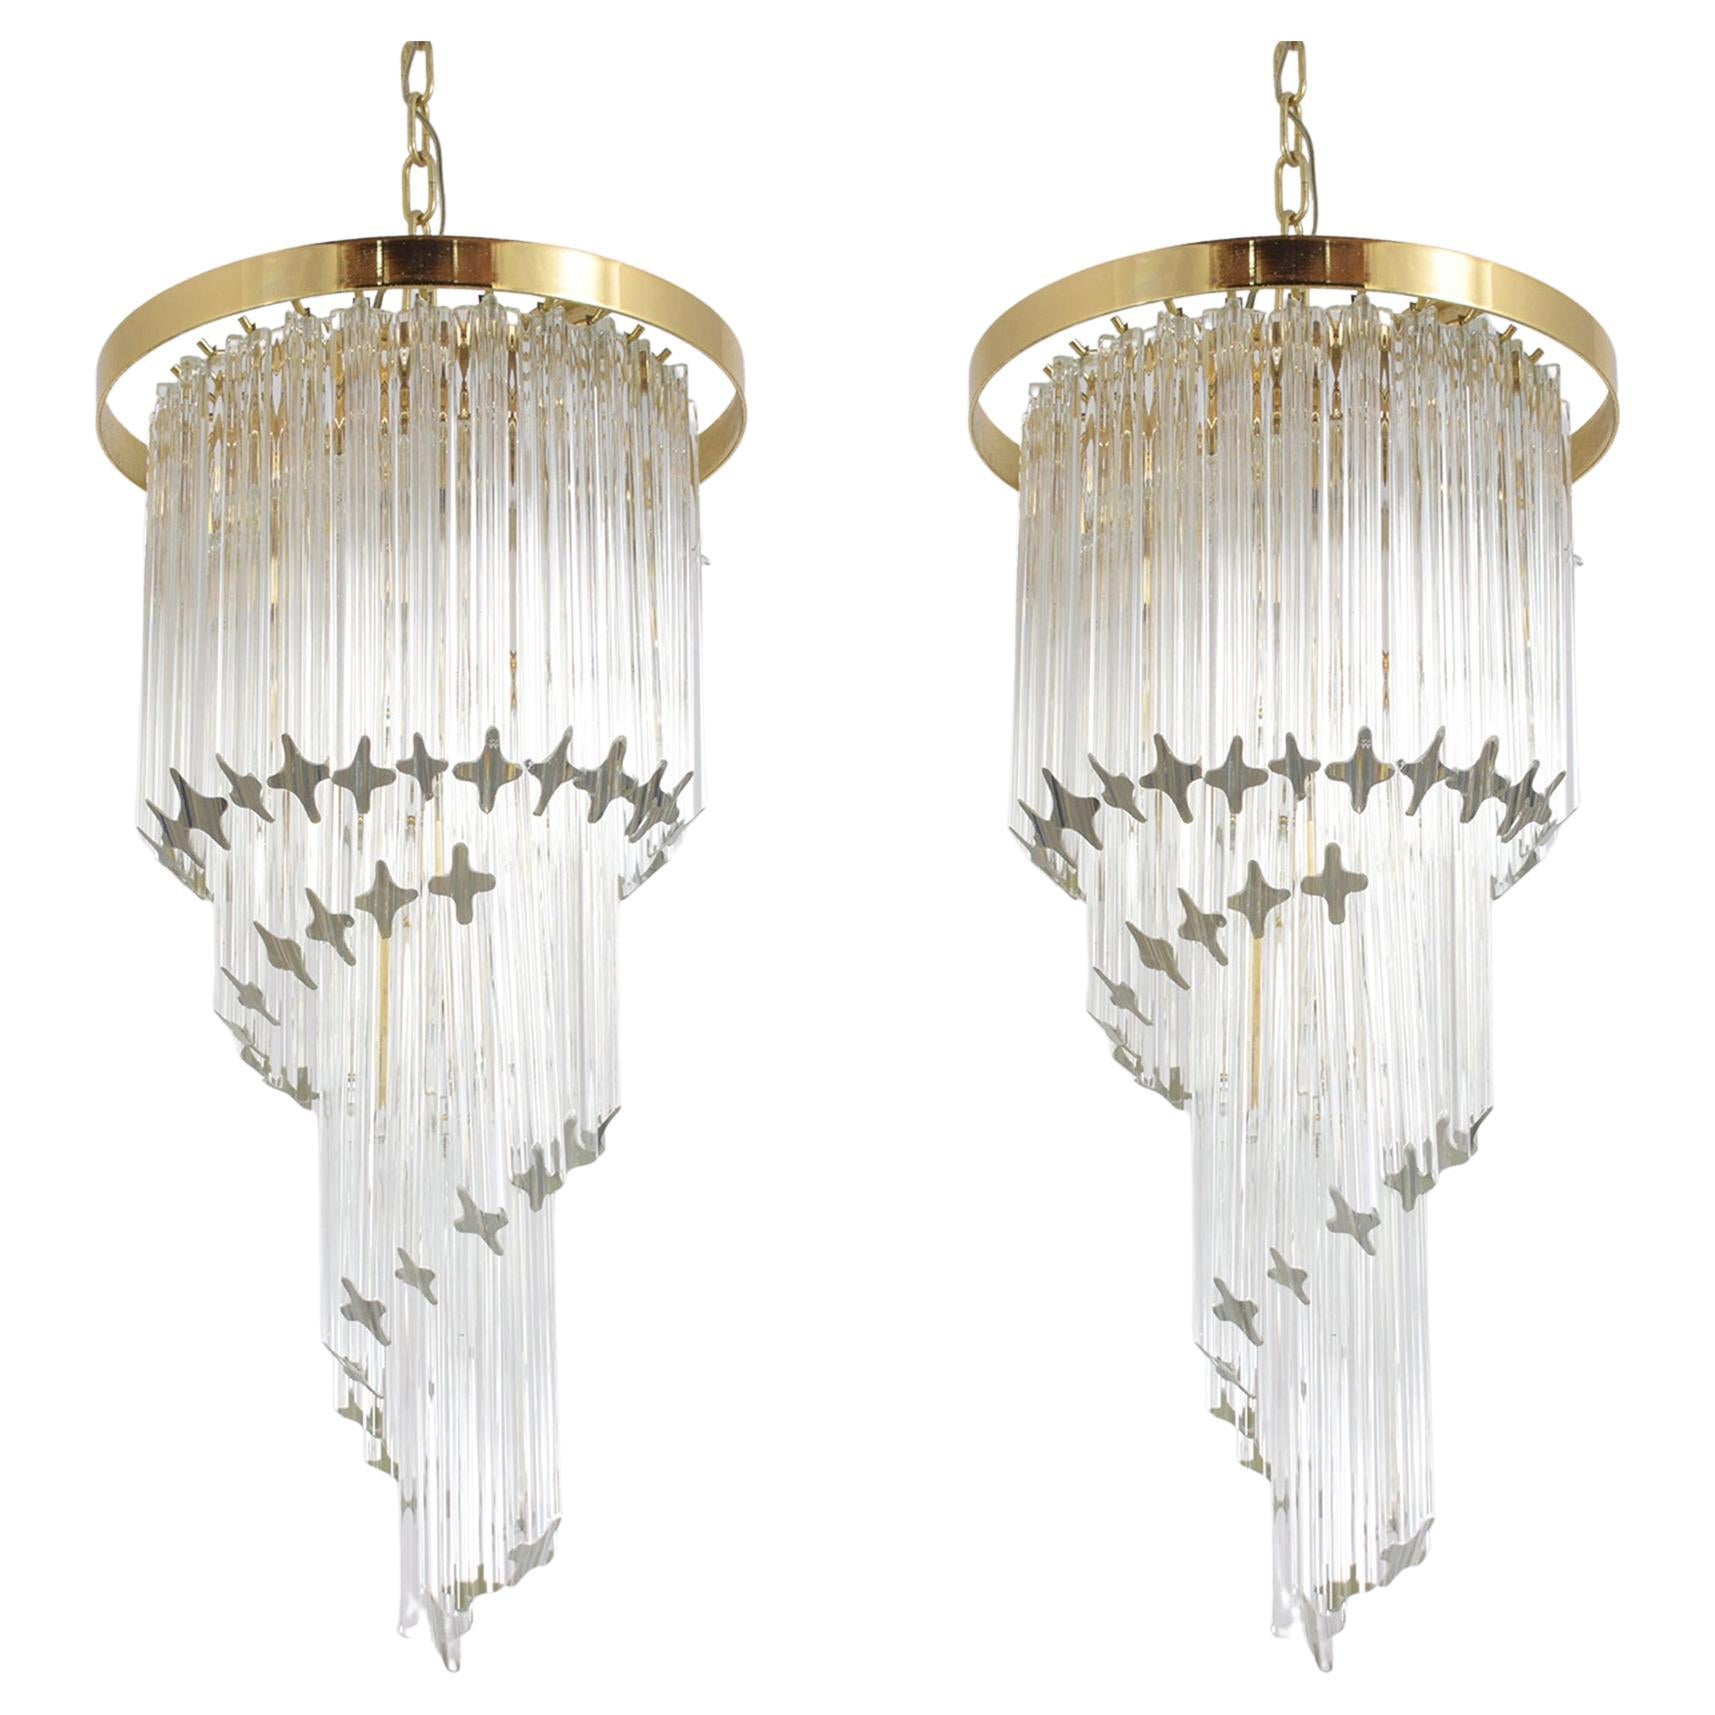 Vintage Drop Pendant Chandelier: Timeless Elegance in Brass and Glass For Sale